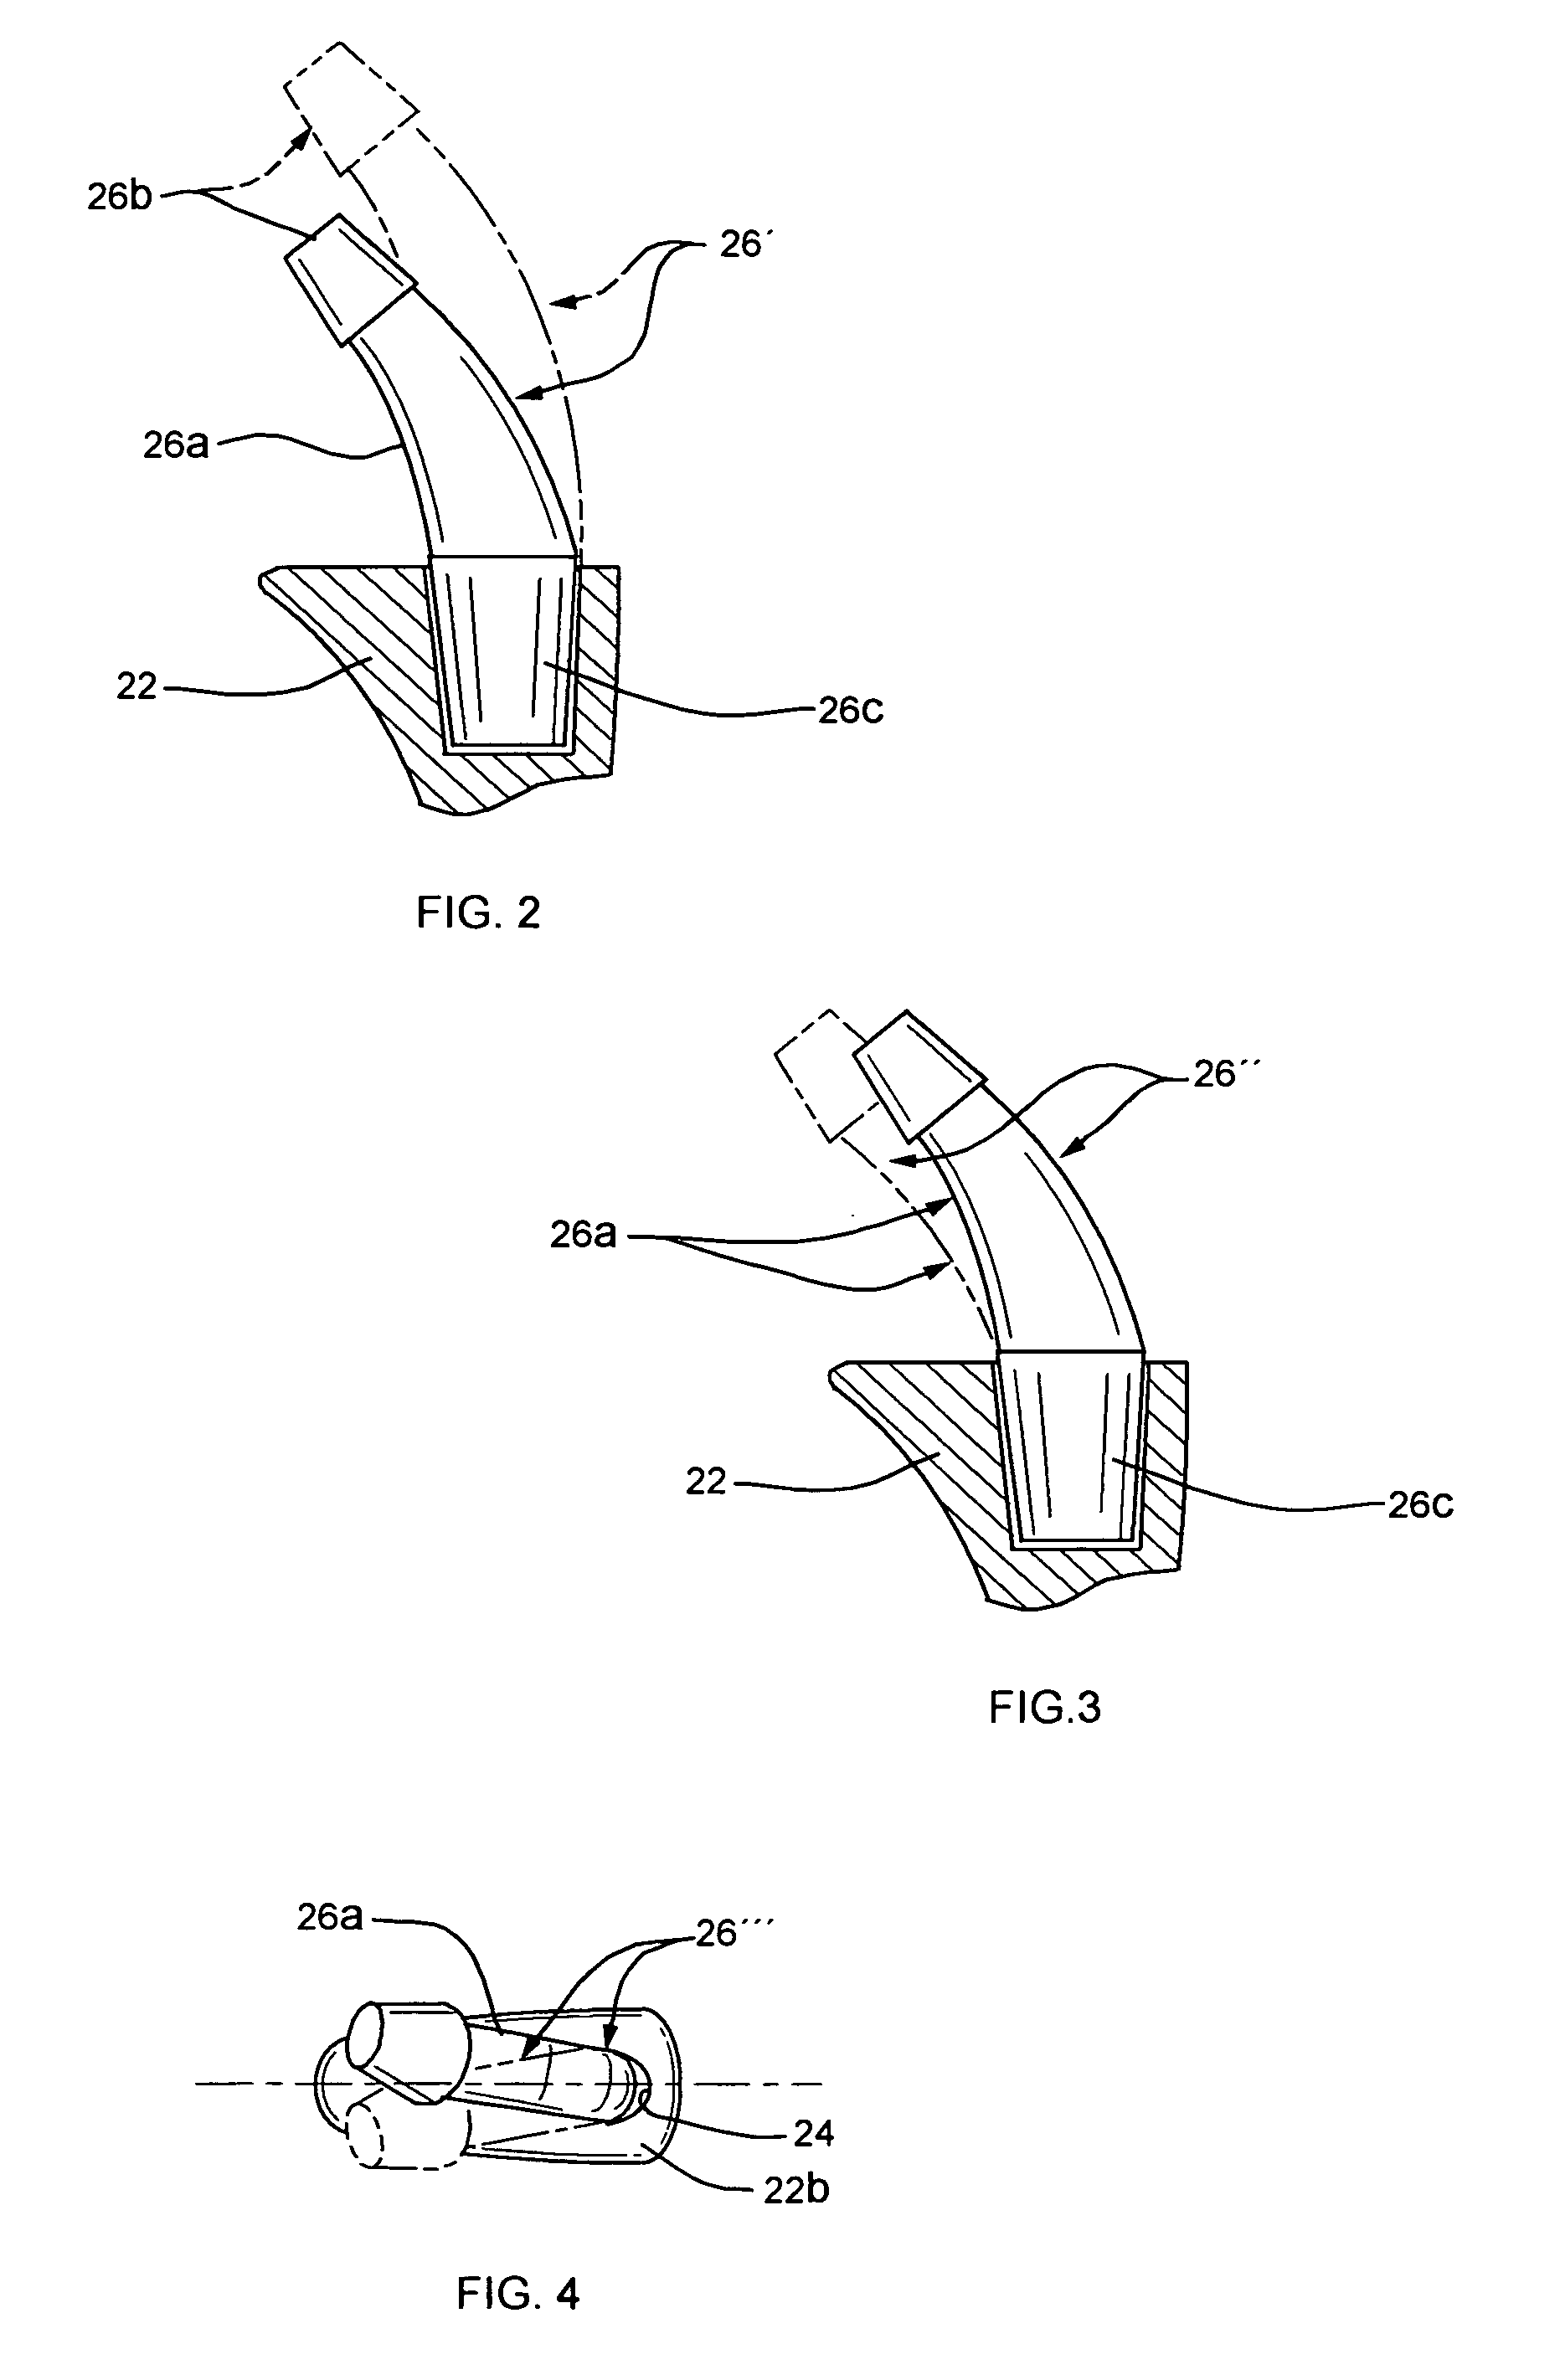 Modular femoral prosthesis with on-axis junction